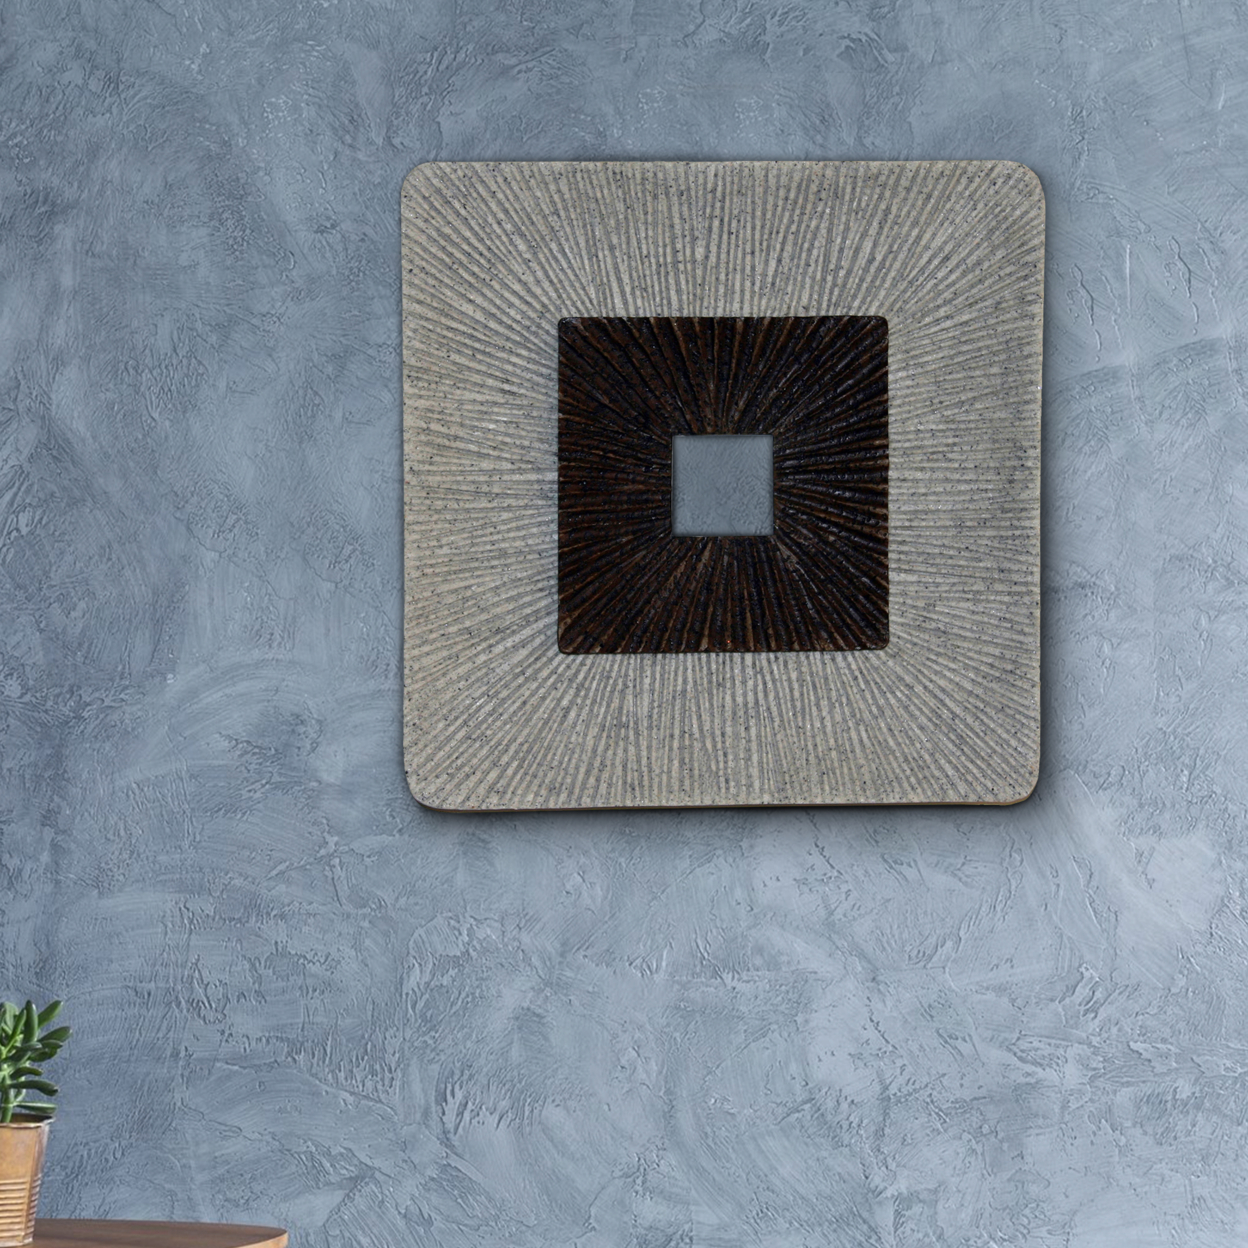 Square Shaped Wall Decor With Ribbed Details, Medium, Brown And Gray- Saltoro Sherpi